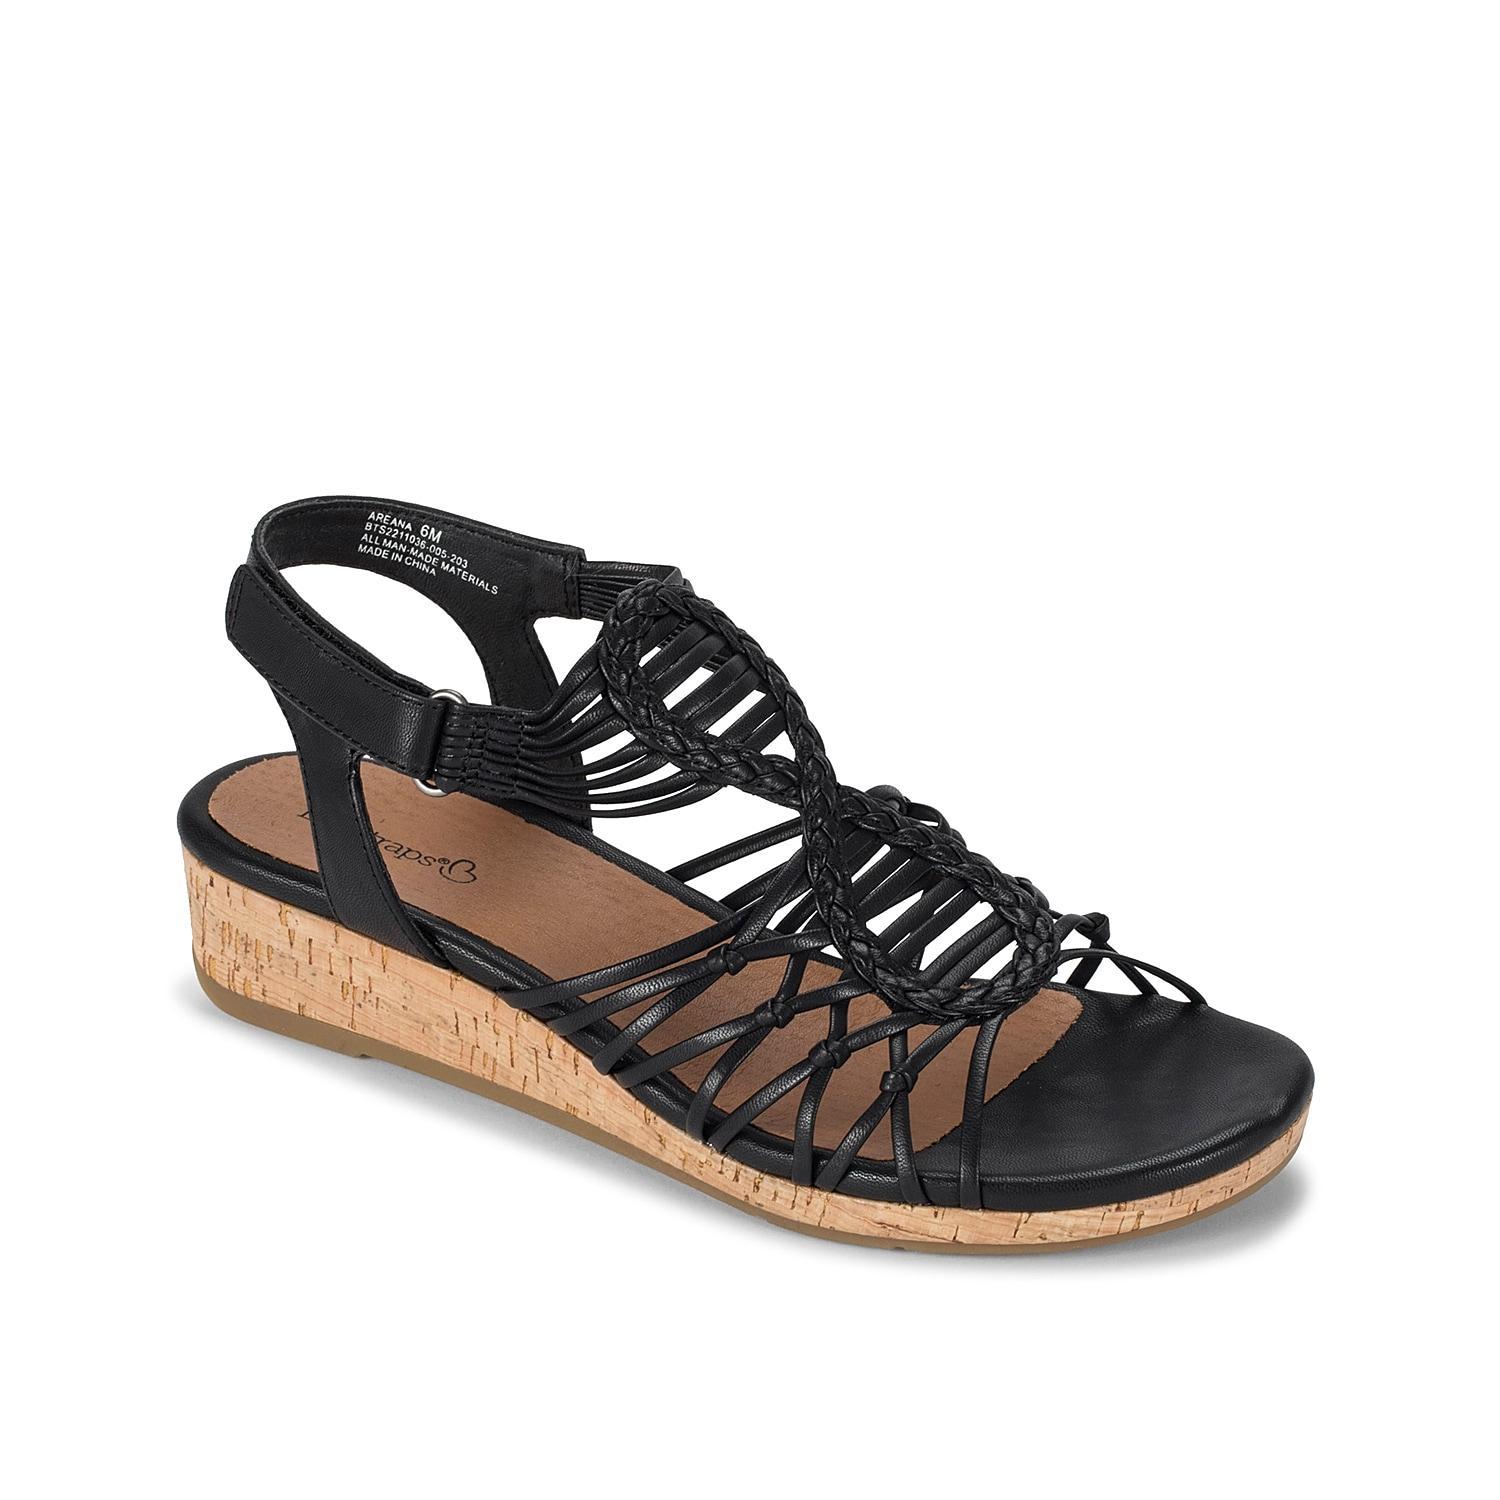 Baretraps Areana Womens Wedge Sandals Lt Brown Product Image